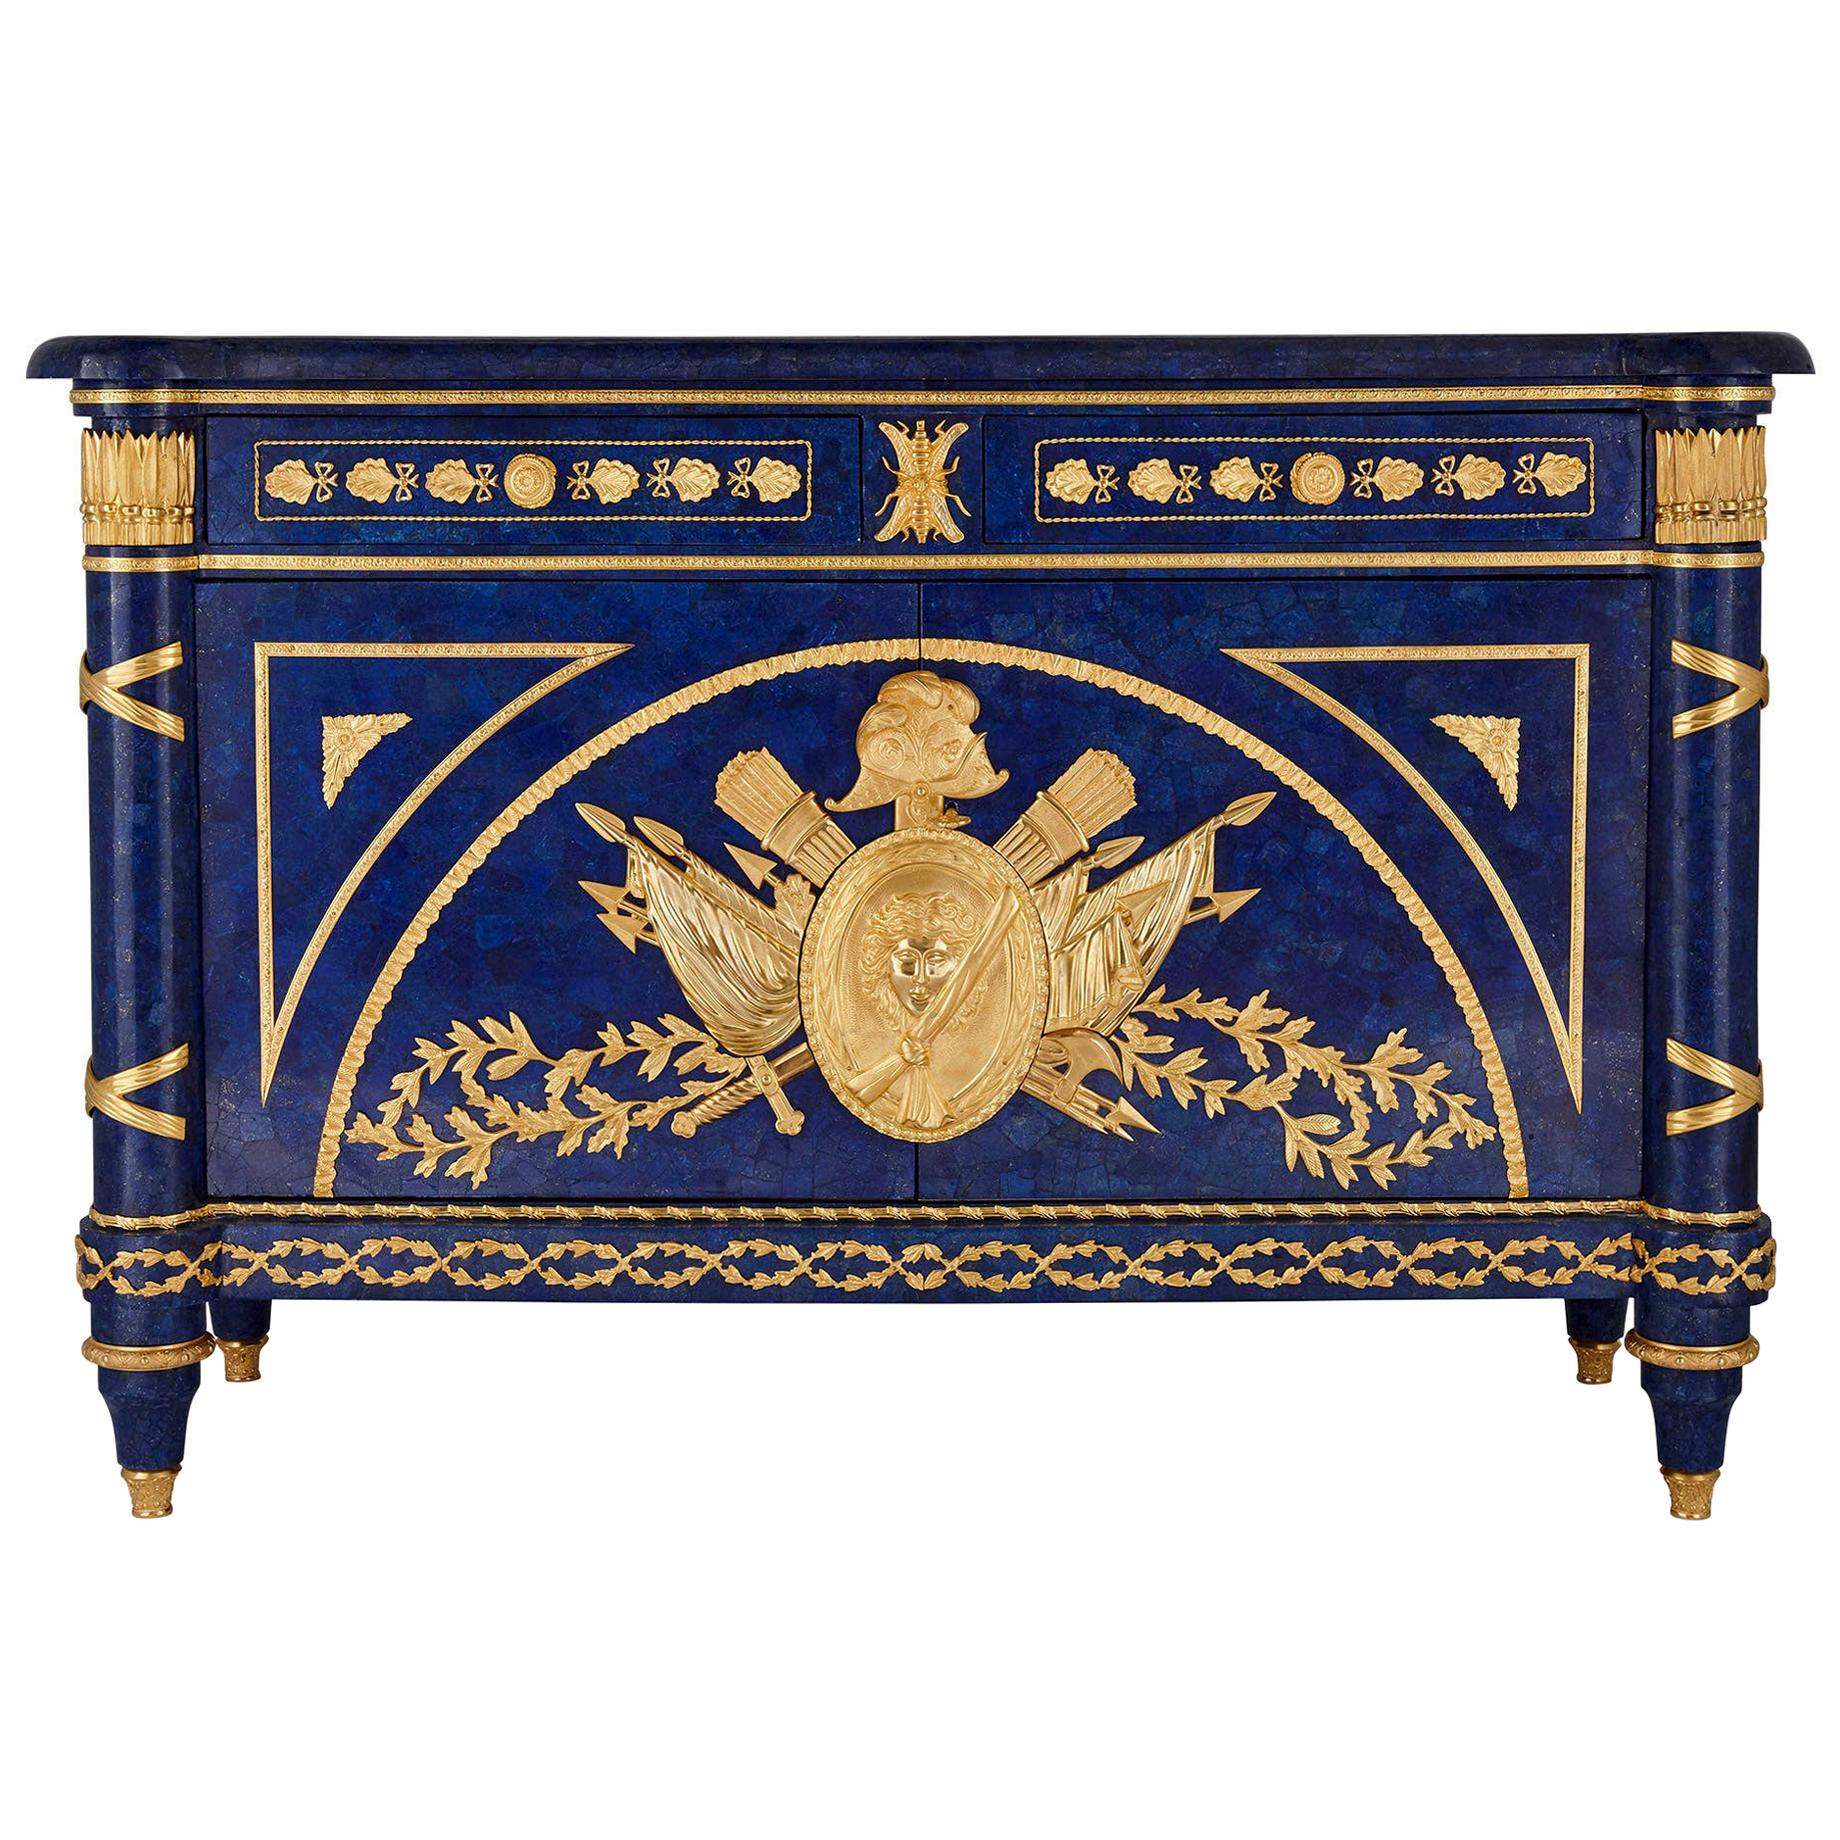 French Gilt Metal Mounted Lapis Commode in the Empire Style